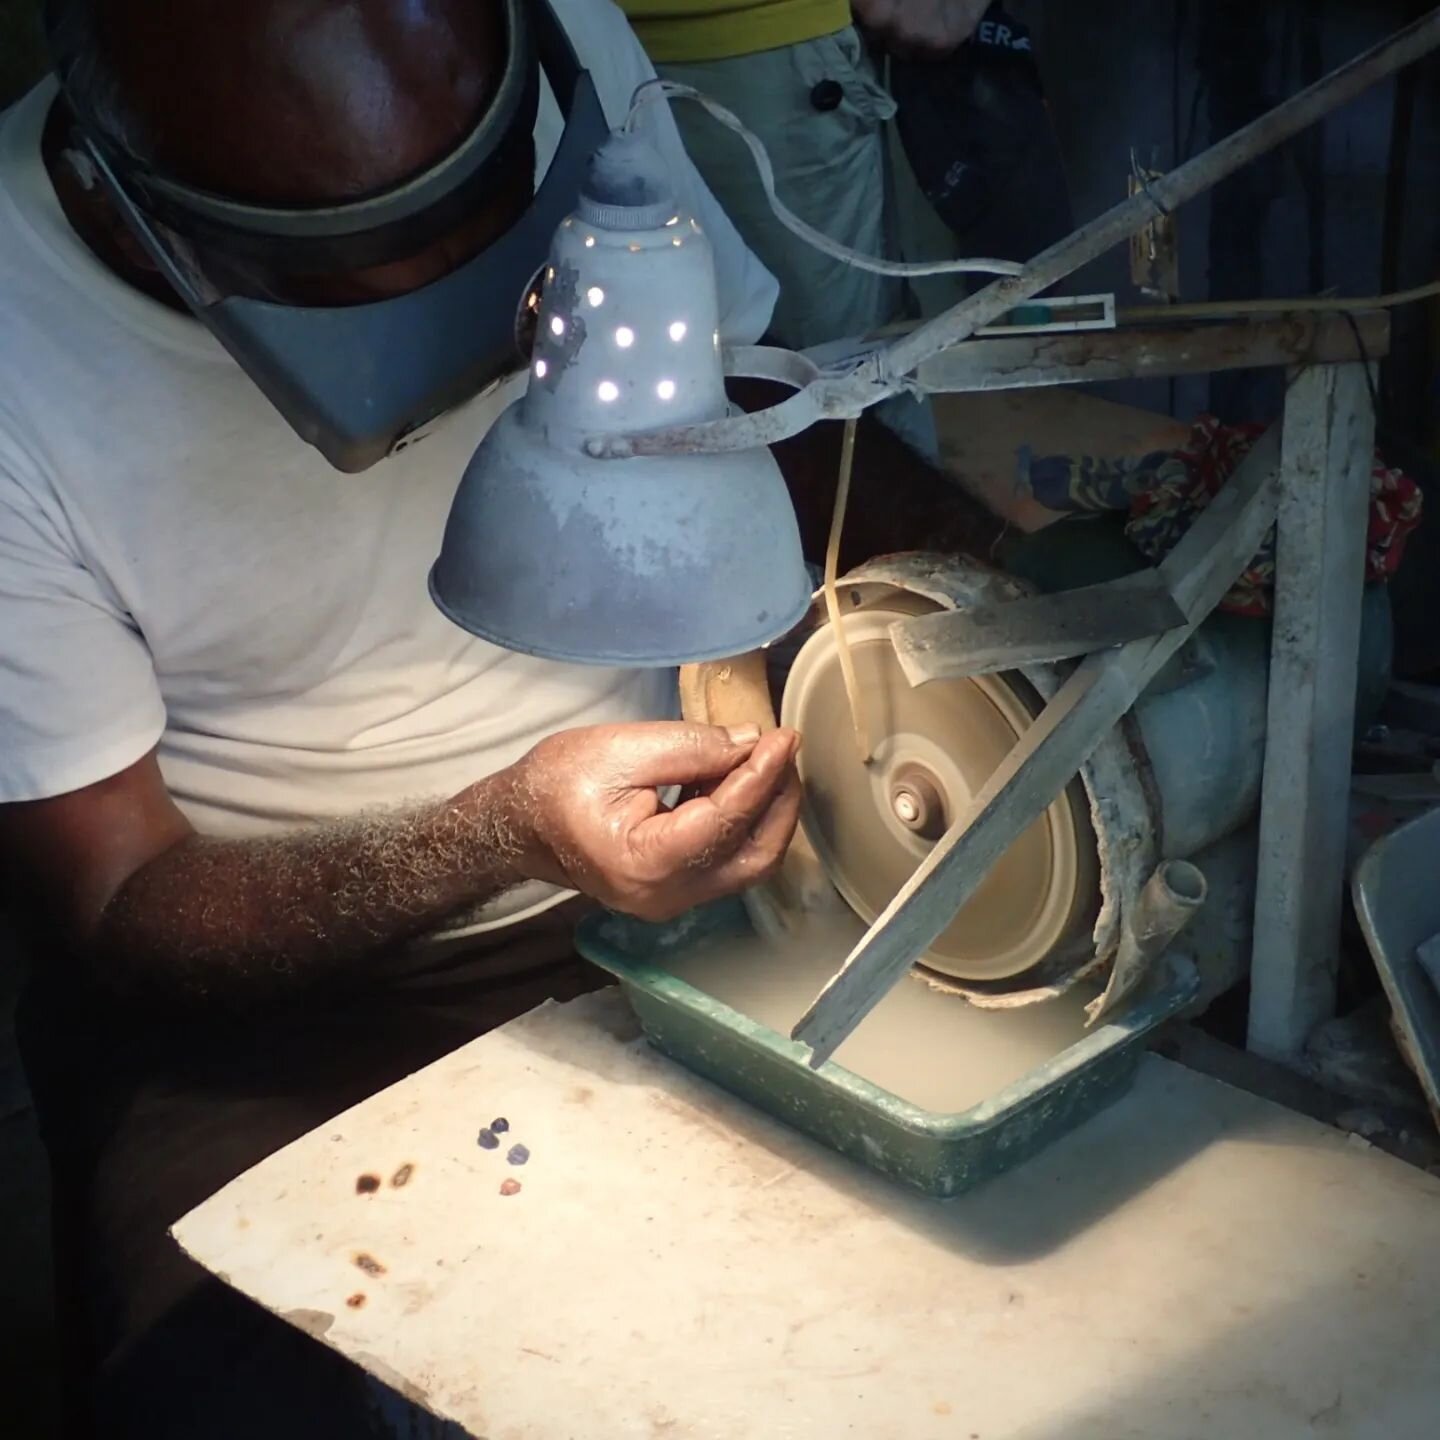 What do you know about the skilled hands that mine and cut your gemstones? 

Image @nineteen48_ltd 

#gemologist #ethicalgemstones #conflictfree #sustainablemining #gemstones #rockhounds #stonecutter #gia #ethicalgemsupplier #knowyoursource #coloured